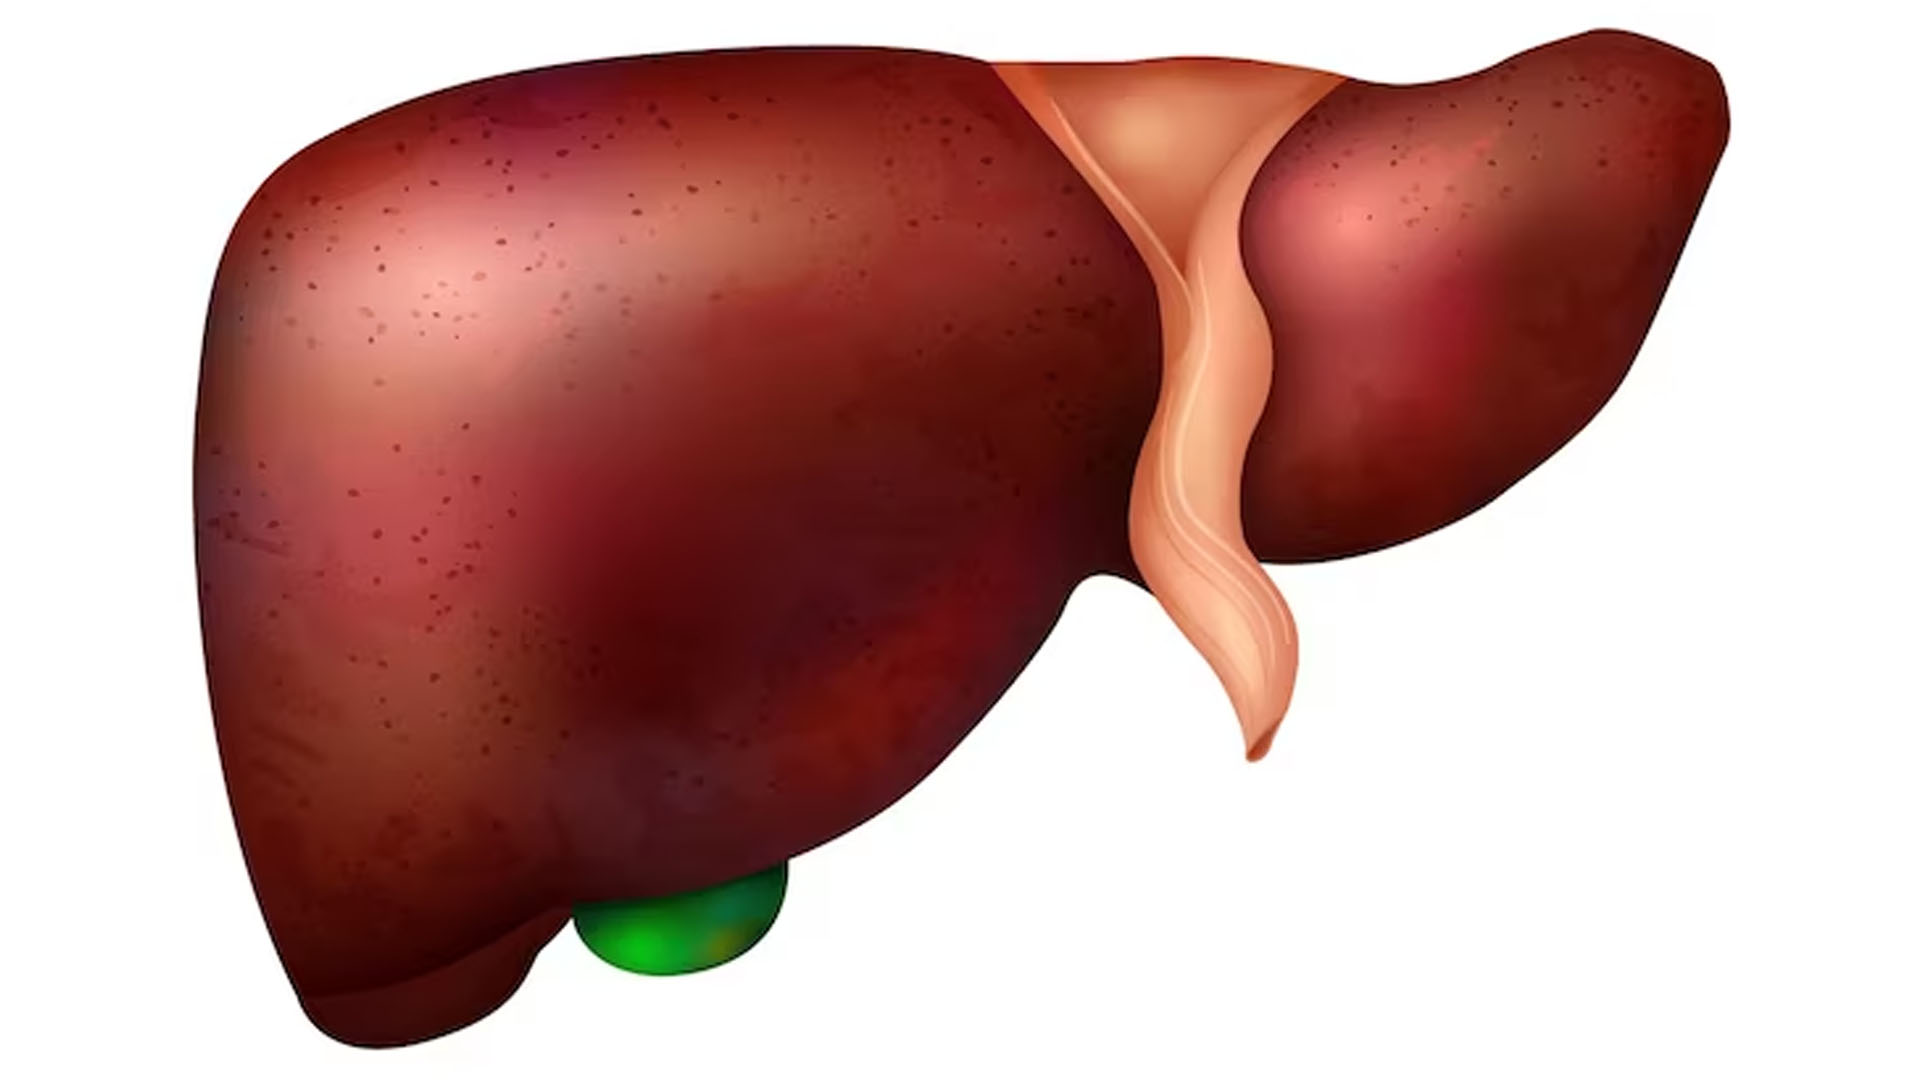 What are the Symptoms of Liver Infection?